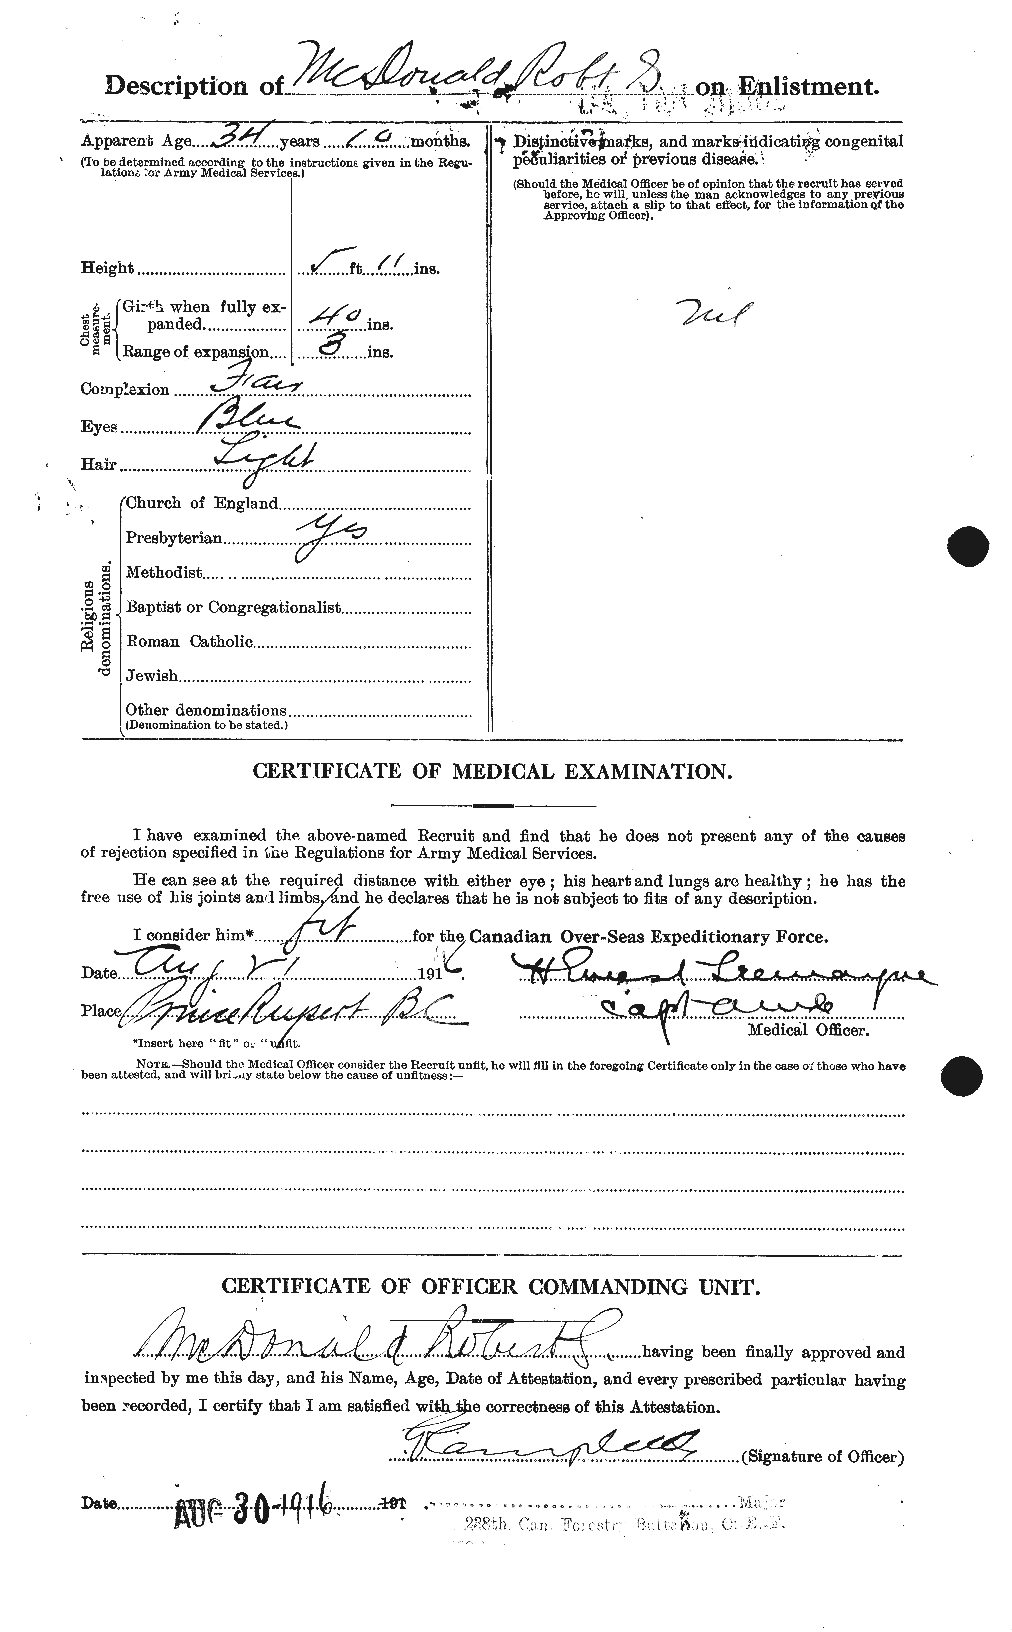 Personnel Records of the First World War - CEF 526888b